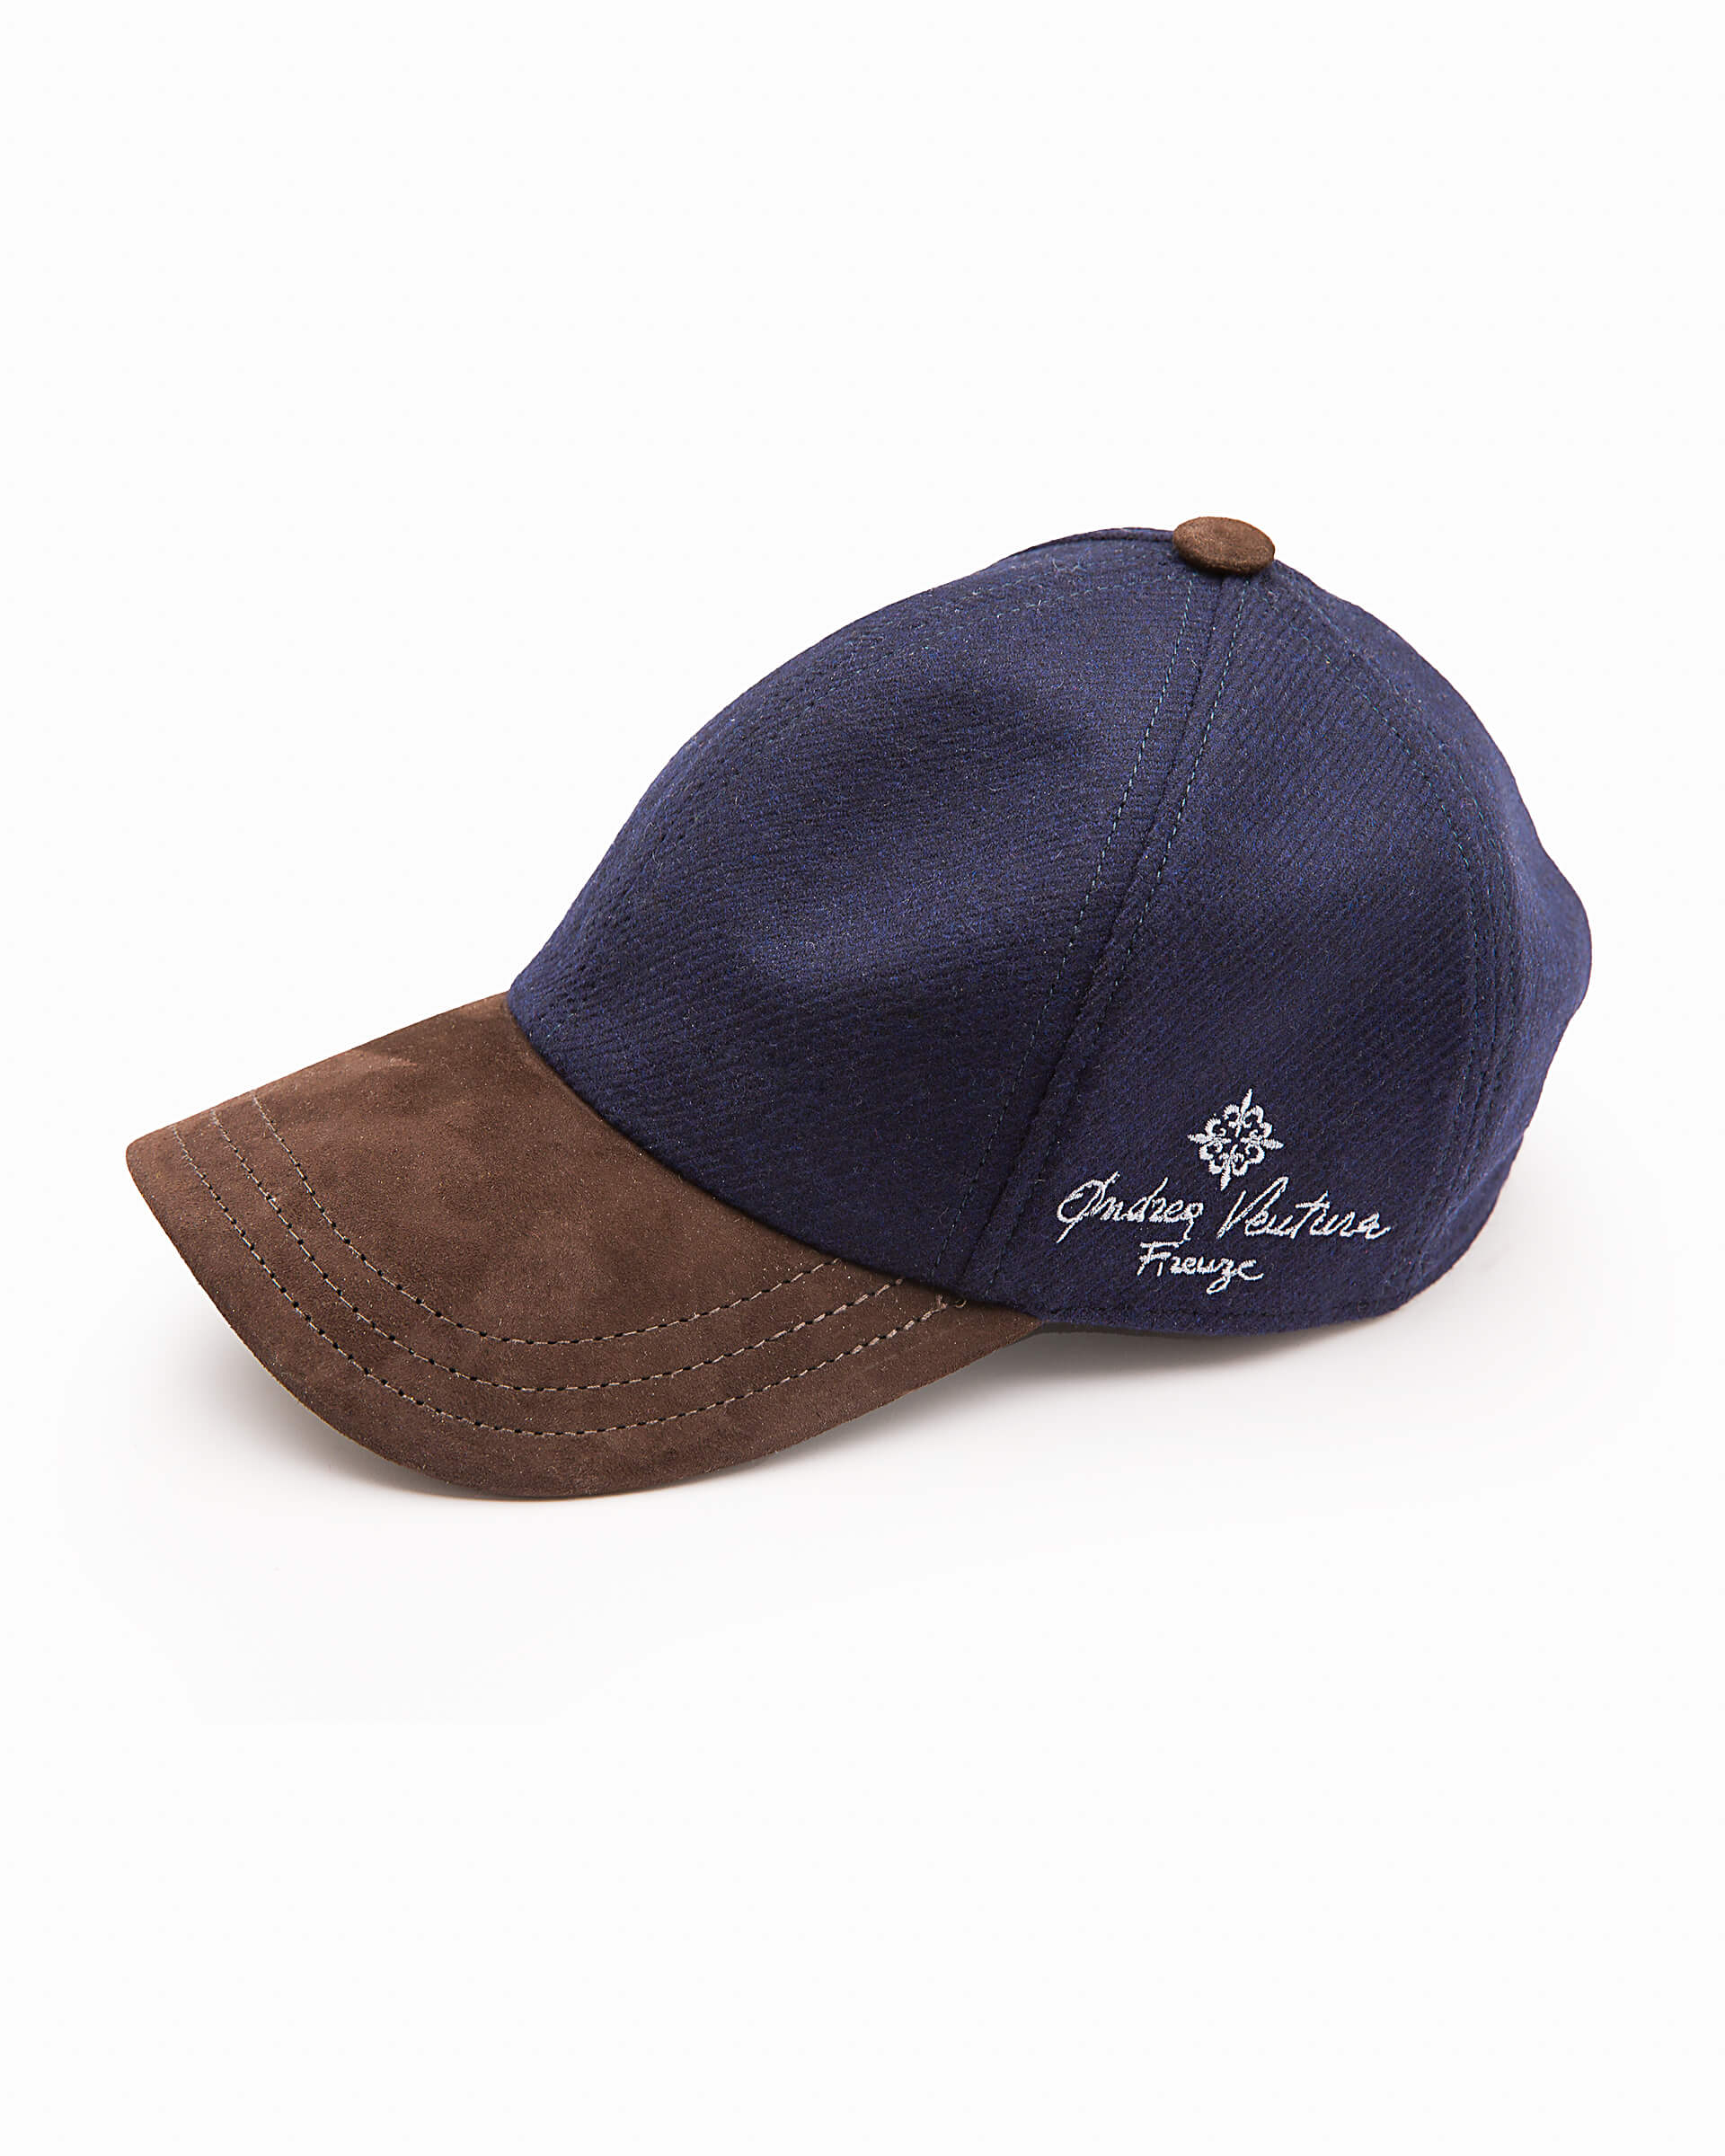 Baseball cap made of Andrea eclipse cashmere hat blue with Ventura Firenze - visor water-repellent